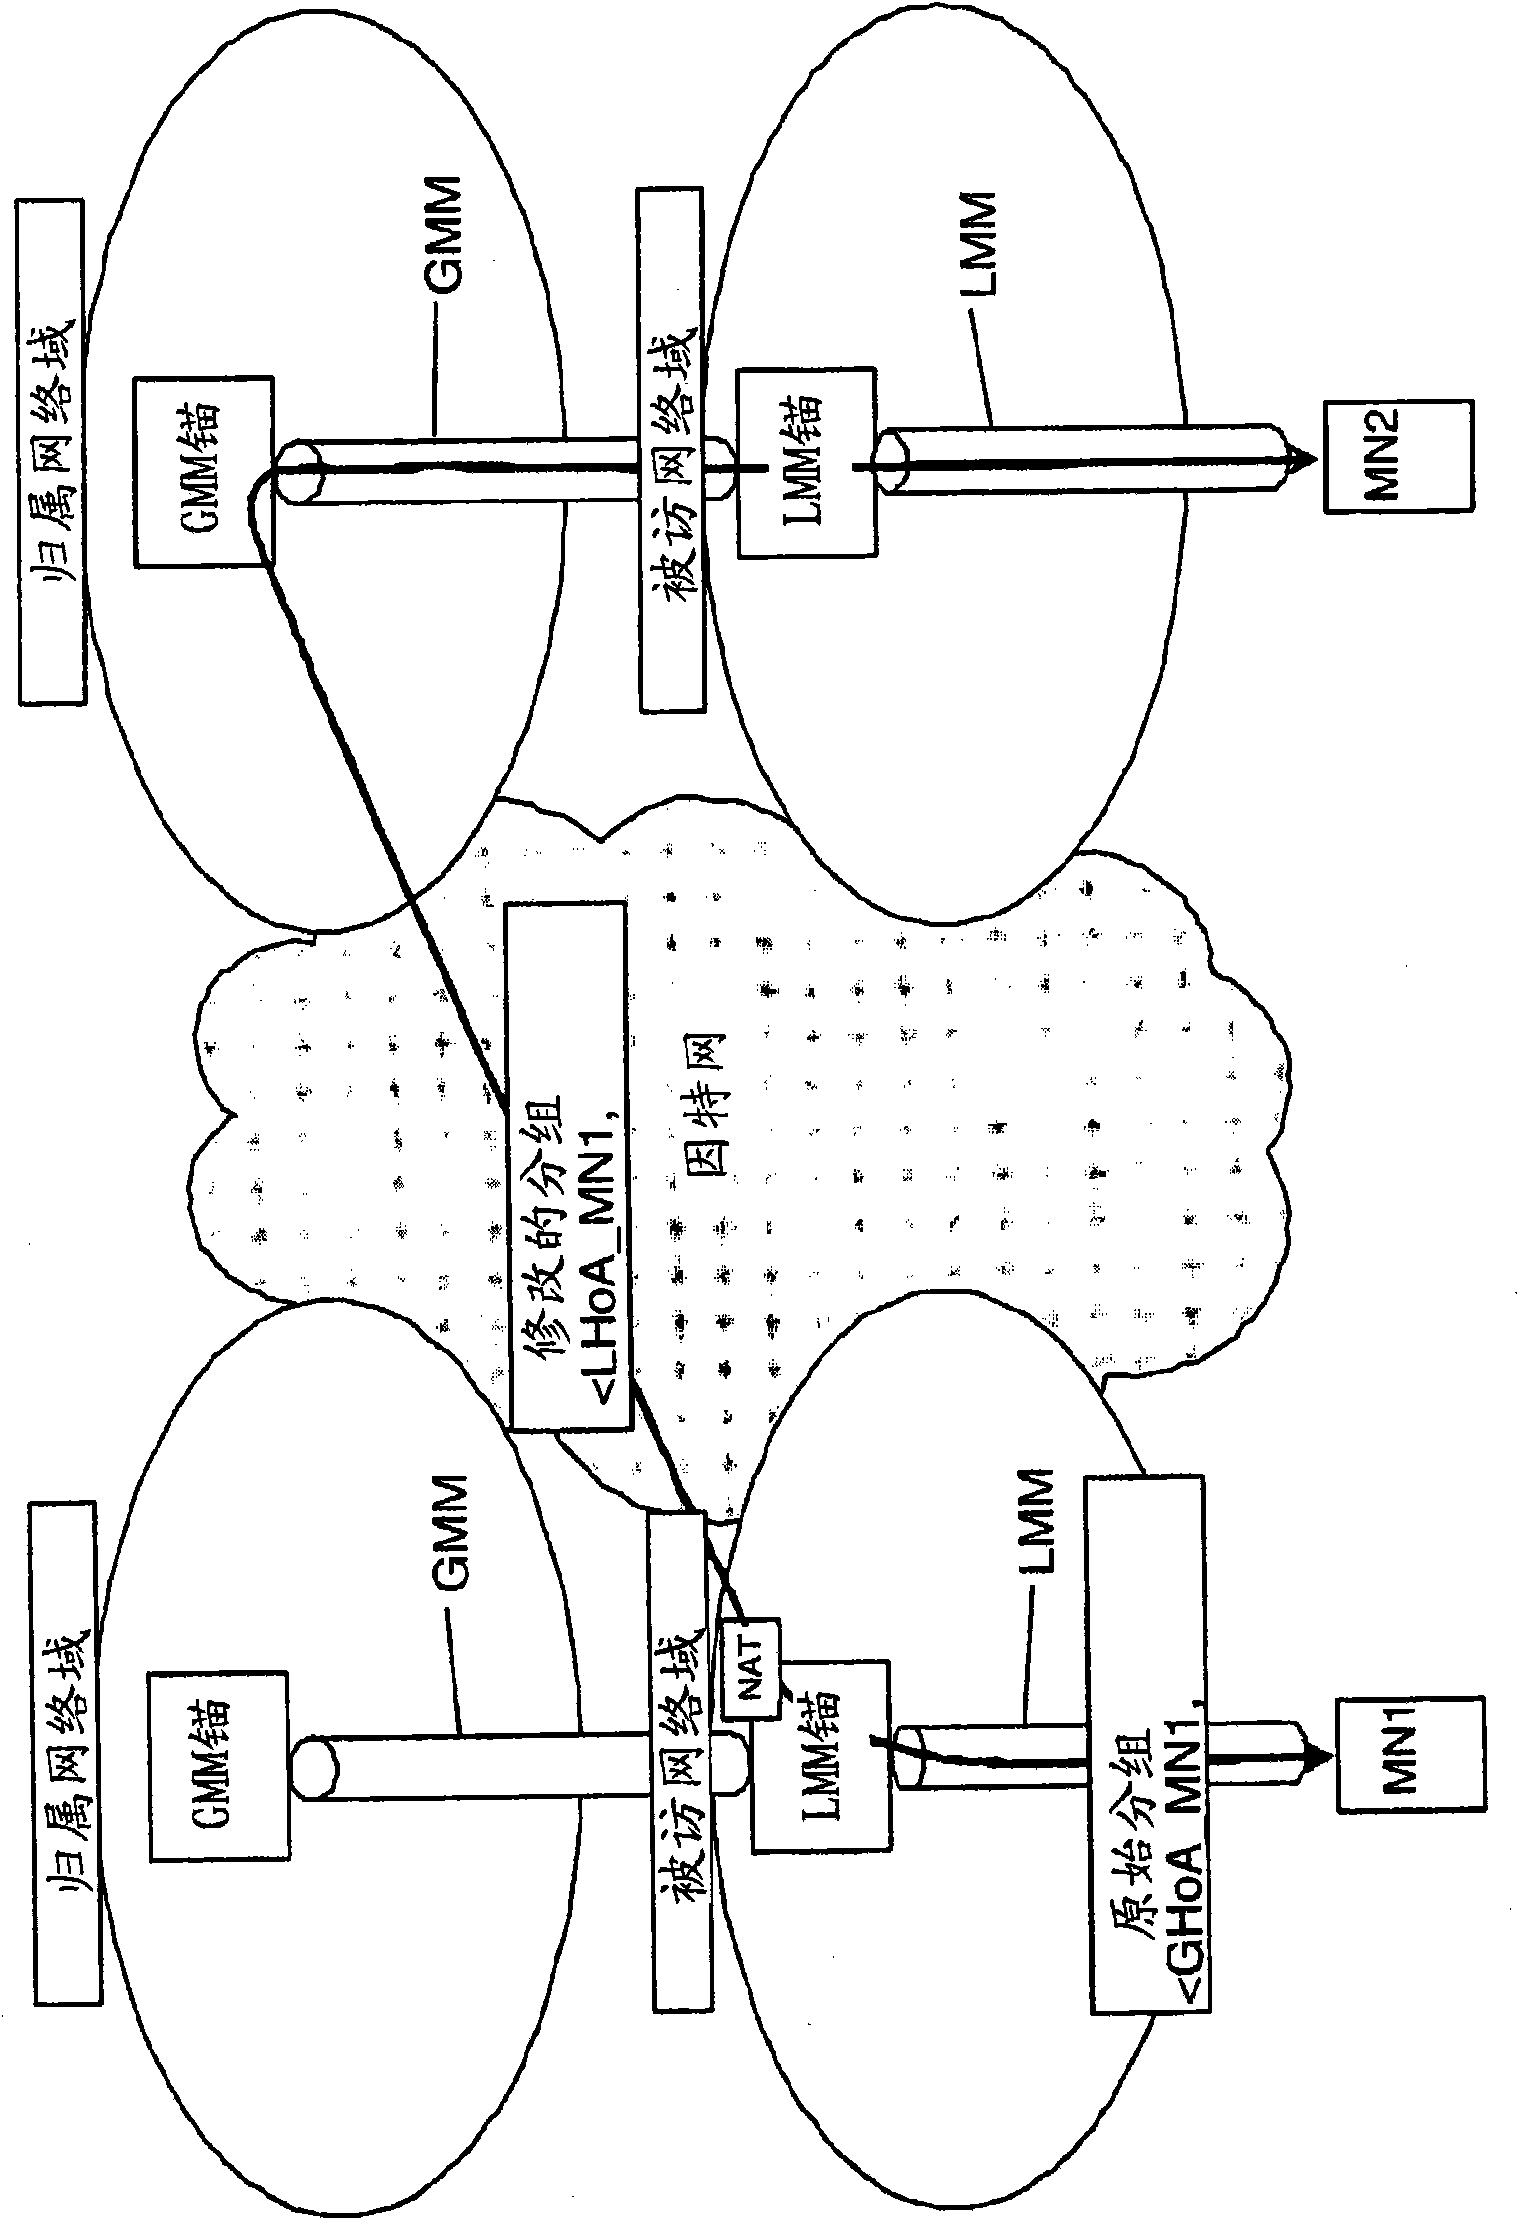 Multihome support method and apparatus